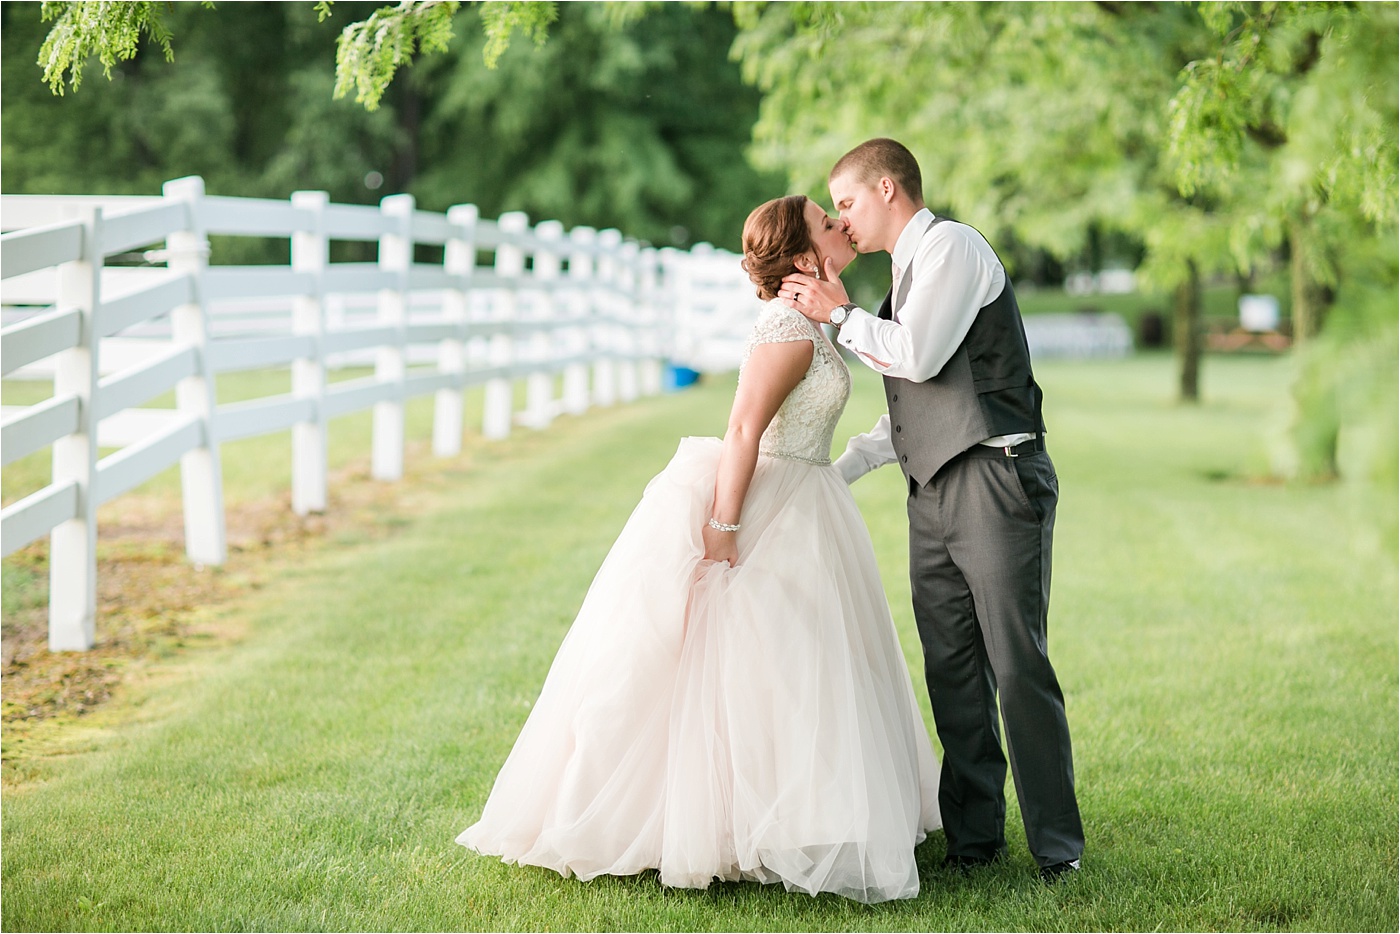 A Blush Outdoor wedding at Irongate Equestrian | KariMe Photography_0177